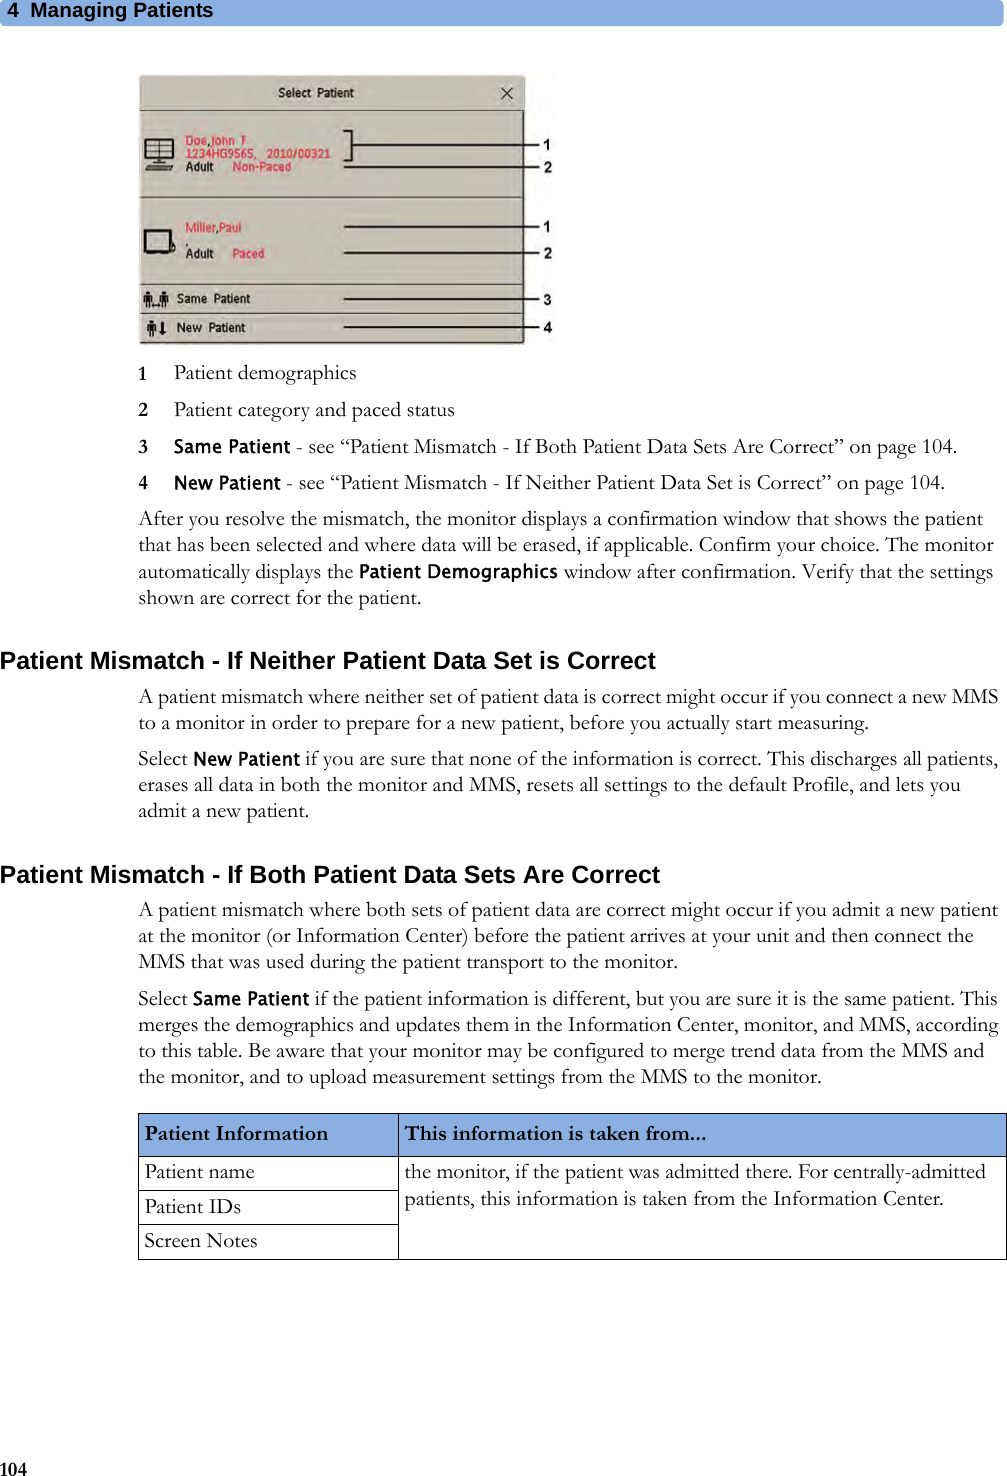 4 Managing Patients1041Patient demographics2Patient category and paced status3Same Patient - see “Patient Mismatch - If Both Patient Data Sets Are Correct” on page 104.4New Patient - see “Patient Mismatch - If Neither Patient Data Set is Correct” on page 104.After you resolve the mismatch, the monitor displays a confirmation window that shows the patient that has been selected and where data will be erased, if applicable. Confirm your choice. The monitor automatically displays the Patient Demographics window after confirmation. Verify that the settings shown are correct for the patient.Patient Mismatch - If Neither Patient Data Set is CorrectA patient mismatch where neither set of patient data is correct might occur if you connect a new MMS to a monitor in order to prepare for a new patient, before you actually start measuring.Select New Patient if you are sure that none of the information is correct. This discharges all patients, erases all data in both the monitor and MMS, resets all settings to the default Profile, and lets you admit a new patient.Patient Mismatch - If Both Patient Data Sets Are CorrectA patient mismatch where both sets of patient data are correct might occur if you admit a new patient at the monitor (or Information Center) before the patient arrives at your unit and then connect the MMS that was used during the patient transport to the monitor.Select Same Patient if the patient information is different, but you are sure it is the same patient. This merges the demographics and updates them in the Information Center, monitor, and MMS, according to this table. Be aware that your monitor may be configured to merge trend data from the MMS and the monitor, and to upload measurement settings from the MMS to the monitor.Patient Information This information is taken from...Patient name the monitor, if the patient was admitted there. For centrally-admitted patients, this information is taken from the Information Center.Patient IDsScreen Notes